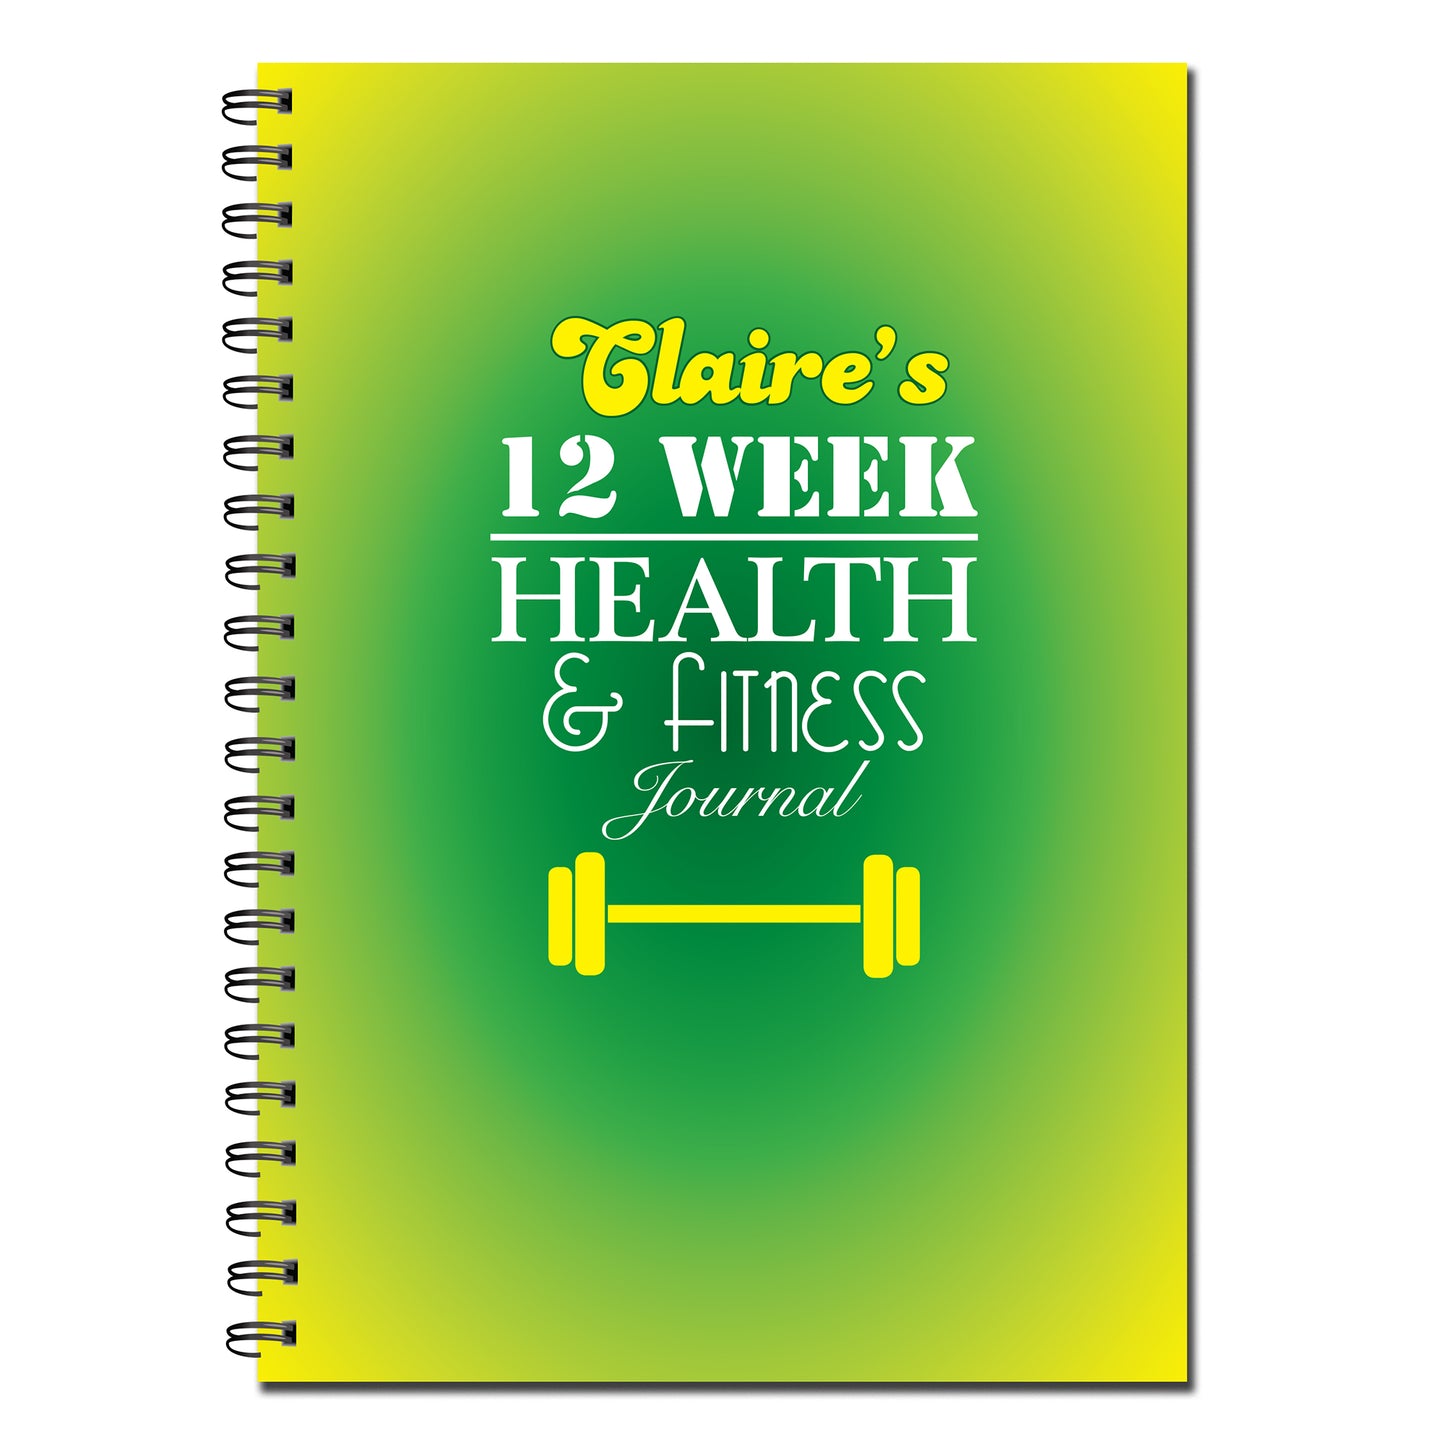 PERSONALISED 12 Week Health & Fitness Journal | Food + Exercise Tracker | A5 | Wiro book 55 pages printed to both sides on quality 120gsm